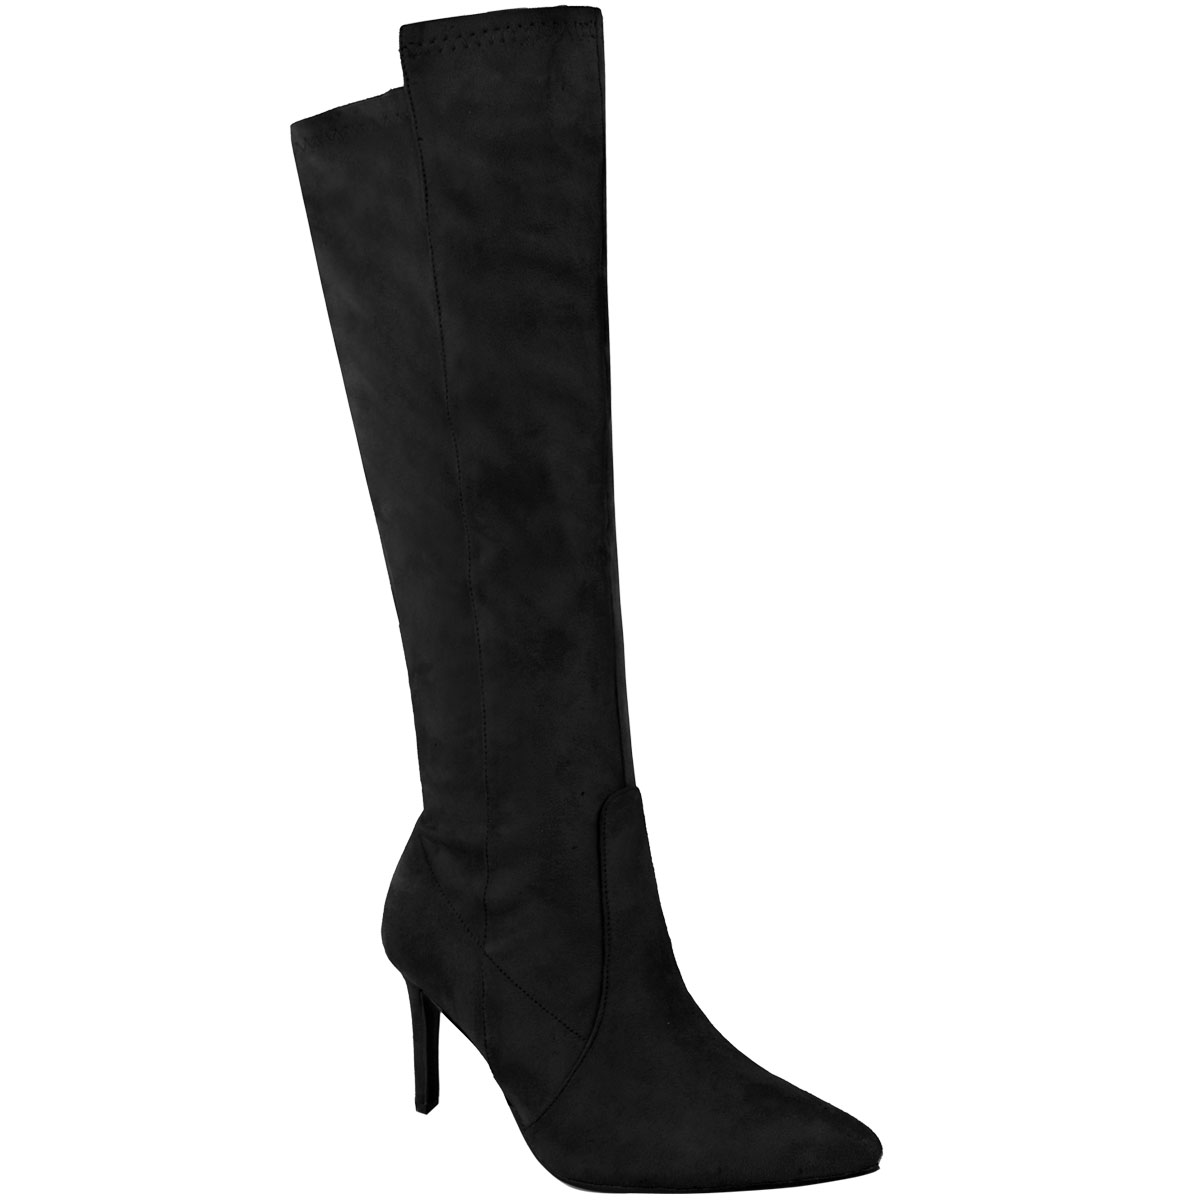 New Ladies Womens Mid Calf Knee High Stretch Low Heel Stiletto Boots ...